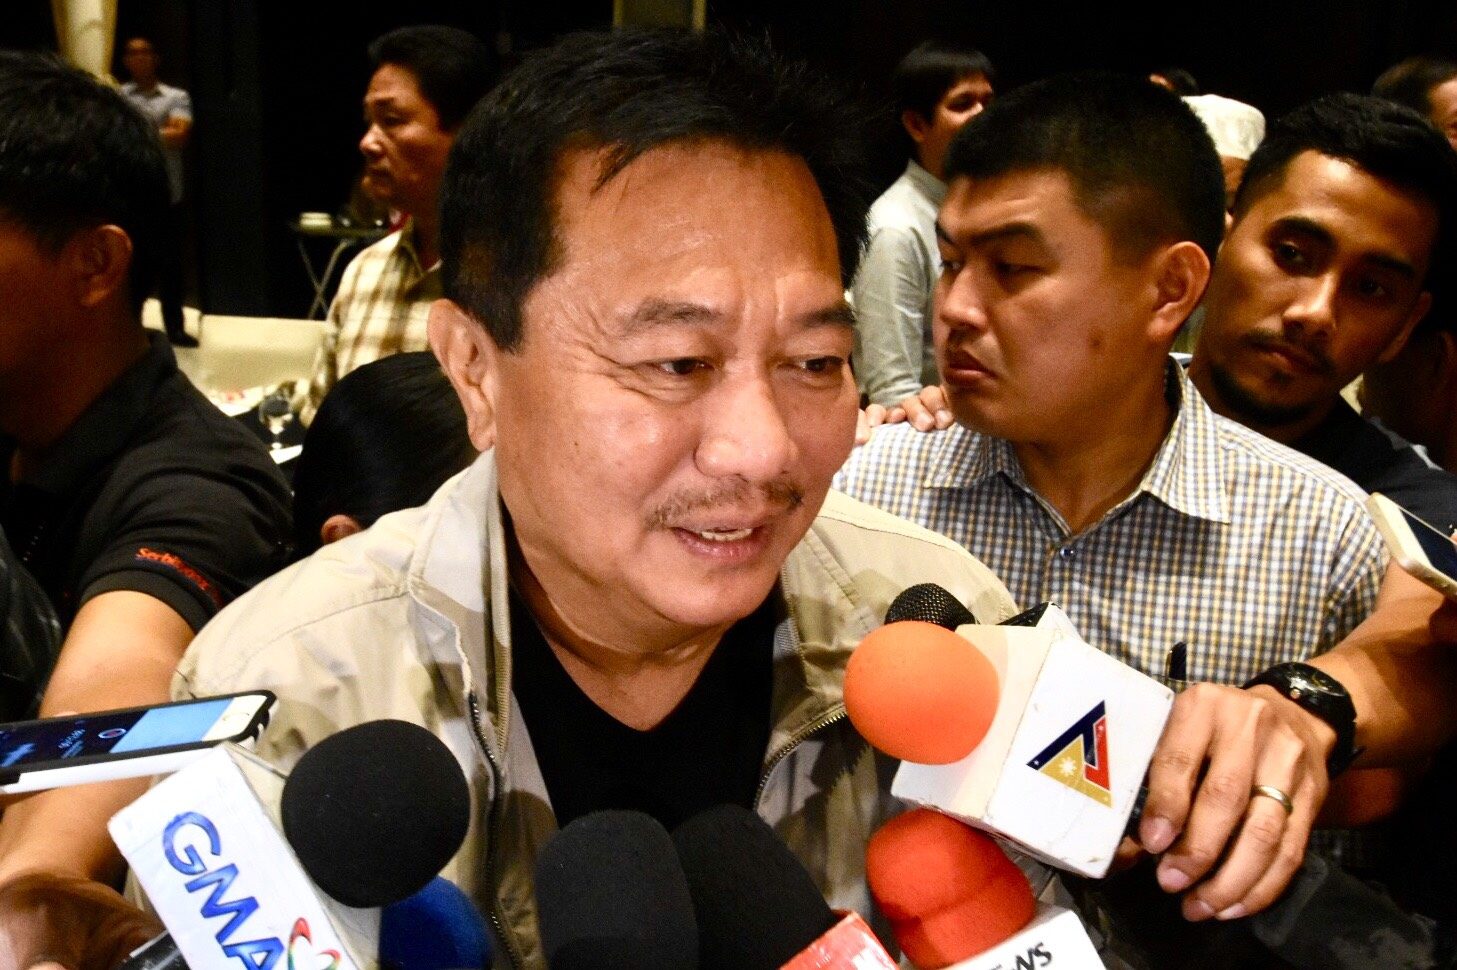 After ouster, Alvarez says he is now ‘at peace’ with himself